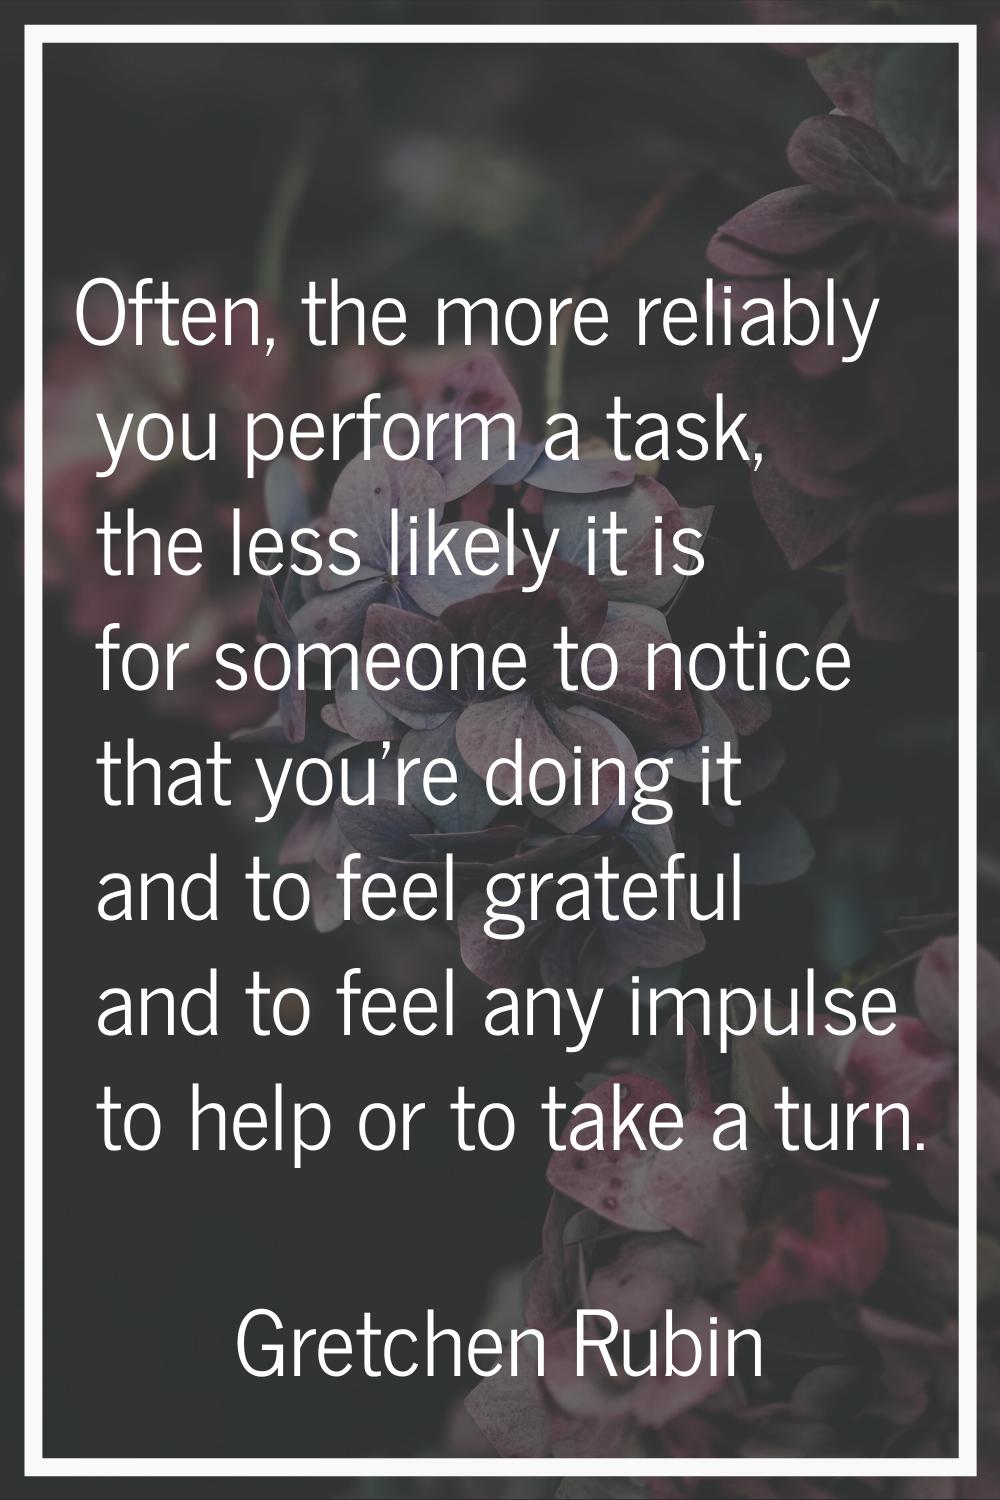 Often, the more reliably you perform a task, the less likely it is for someone to notice that you'r